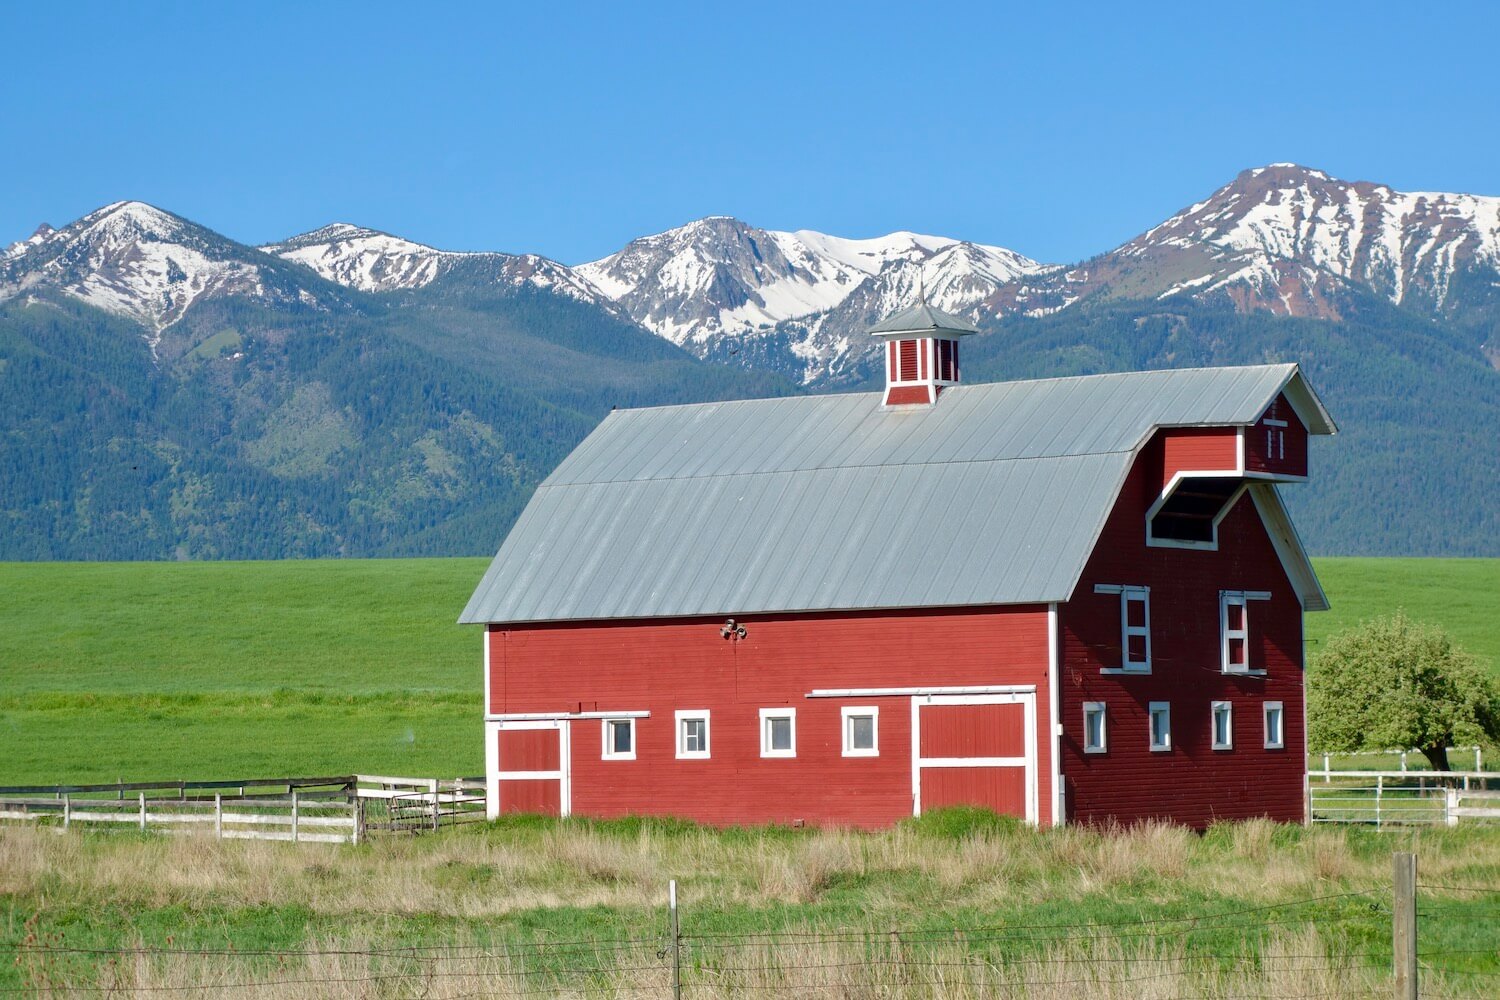 A red barn can be seen from the side of the road near Joseph Oregon on a road trip through the Wallowa Mountains, which are snow covered in the background of this photo.  The barn has a gray metal roof.  